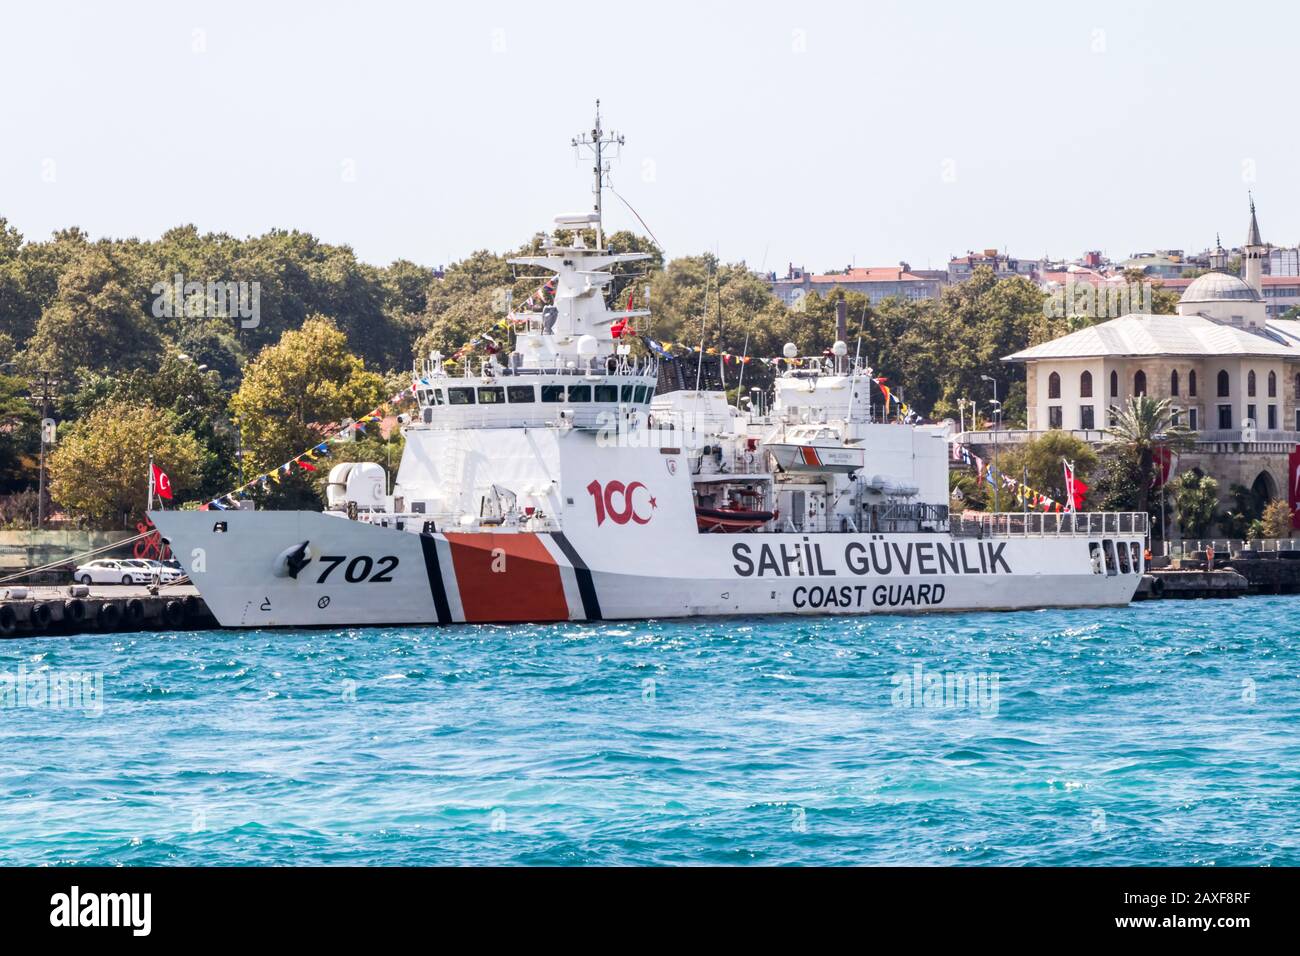 Istanbul, Turkey - August 30th 2019: Coastguard vessel moored on the Boshorous. The coastguard is under the command of the Minister for the Interior. Stock Photo